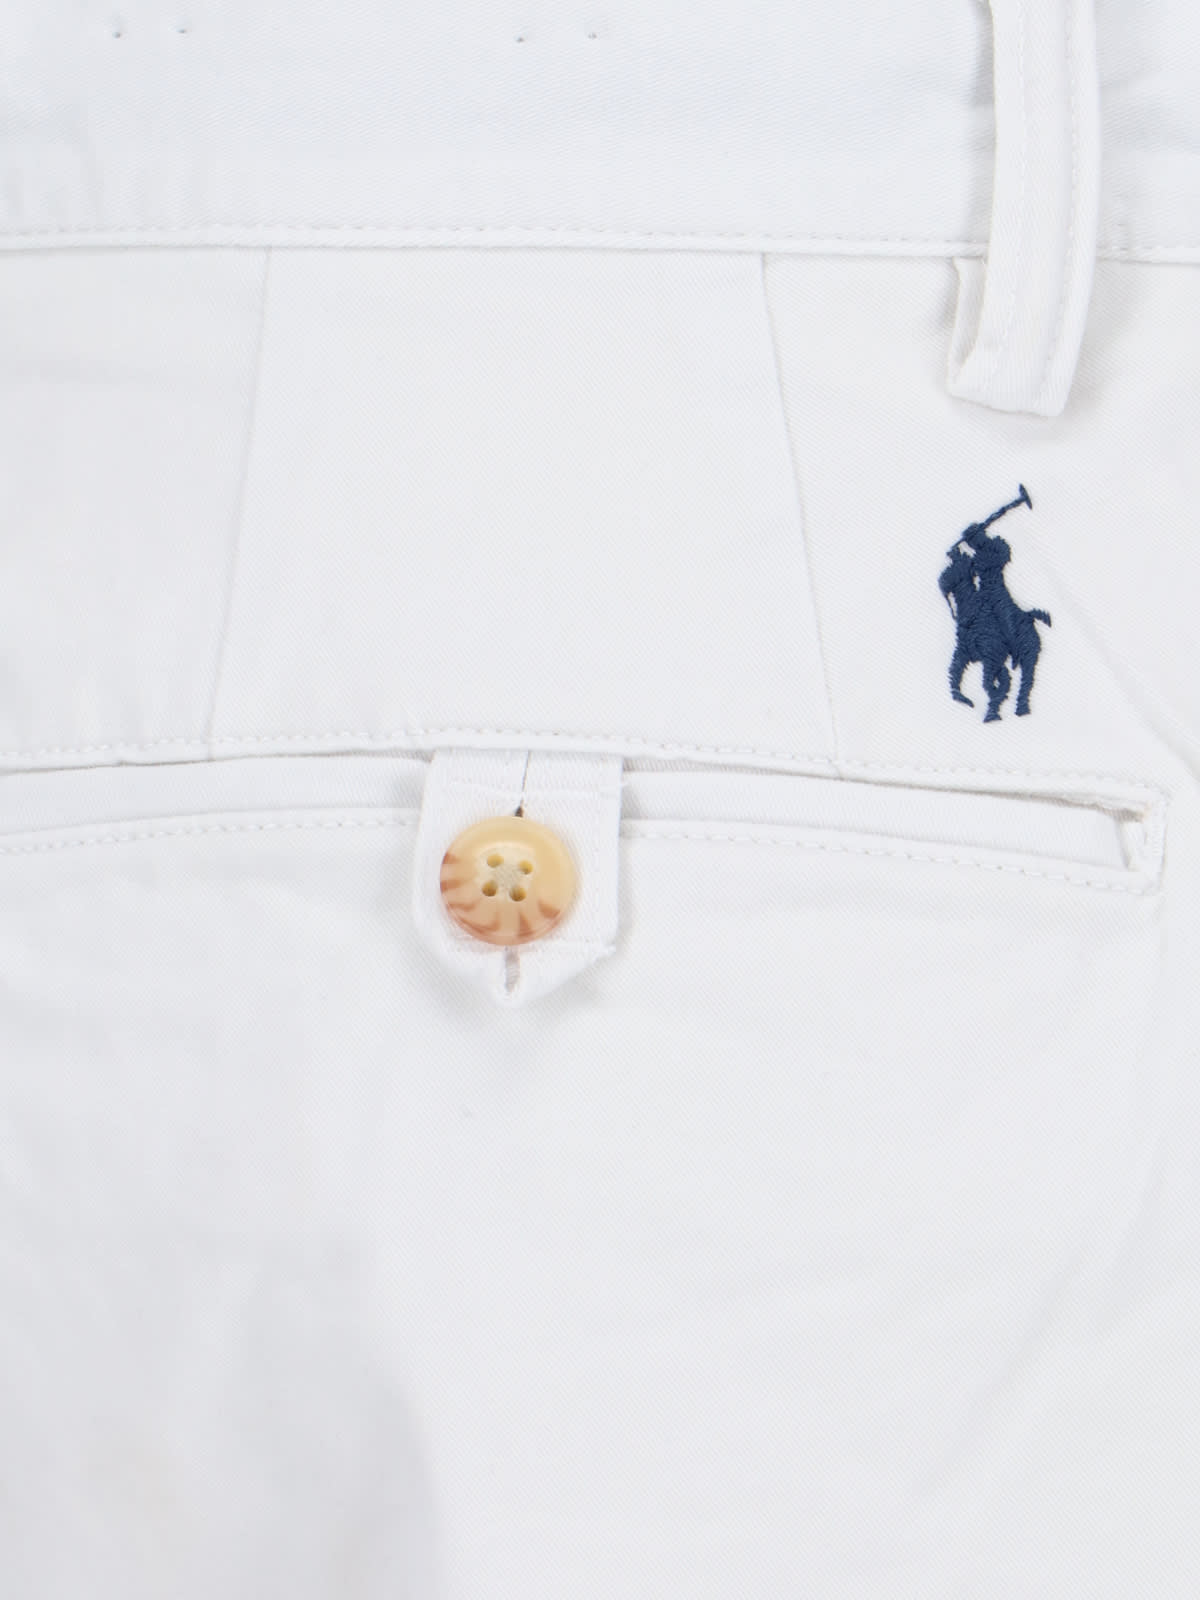 Shop Polo Ralph Lauren Logo Embroidery Shorts In White